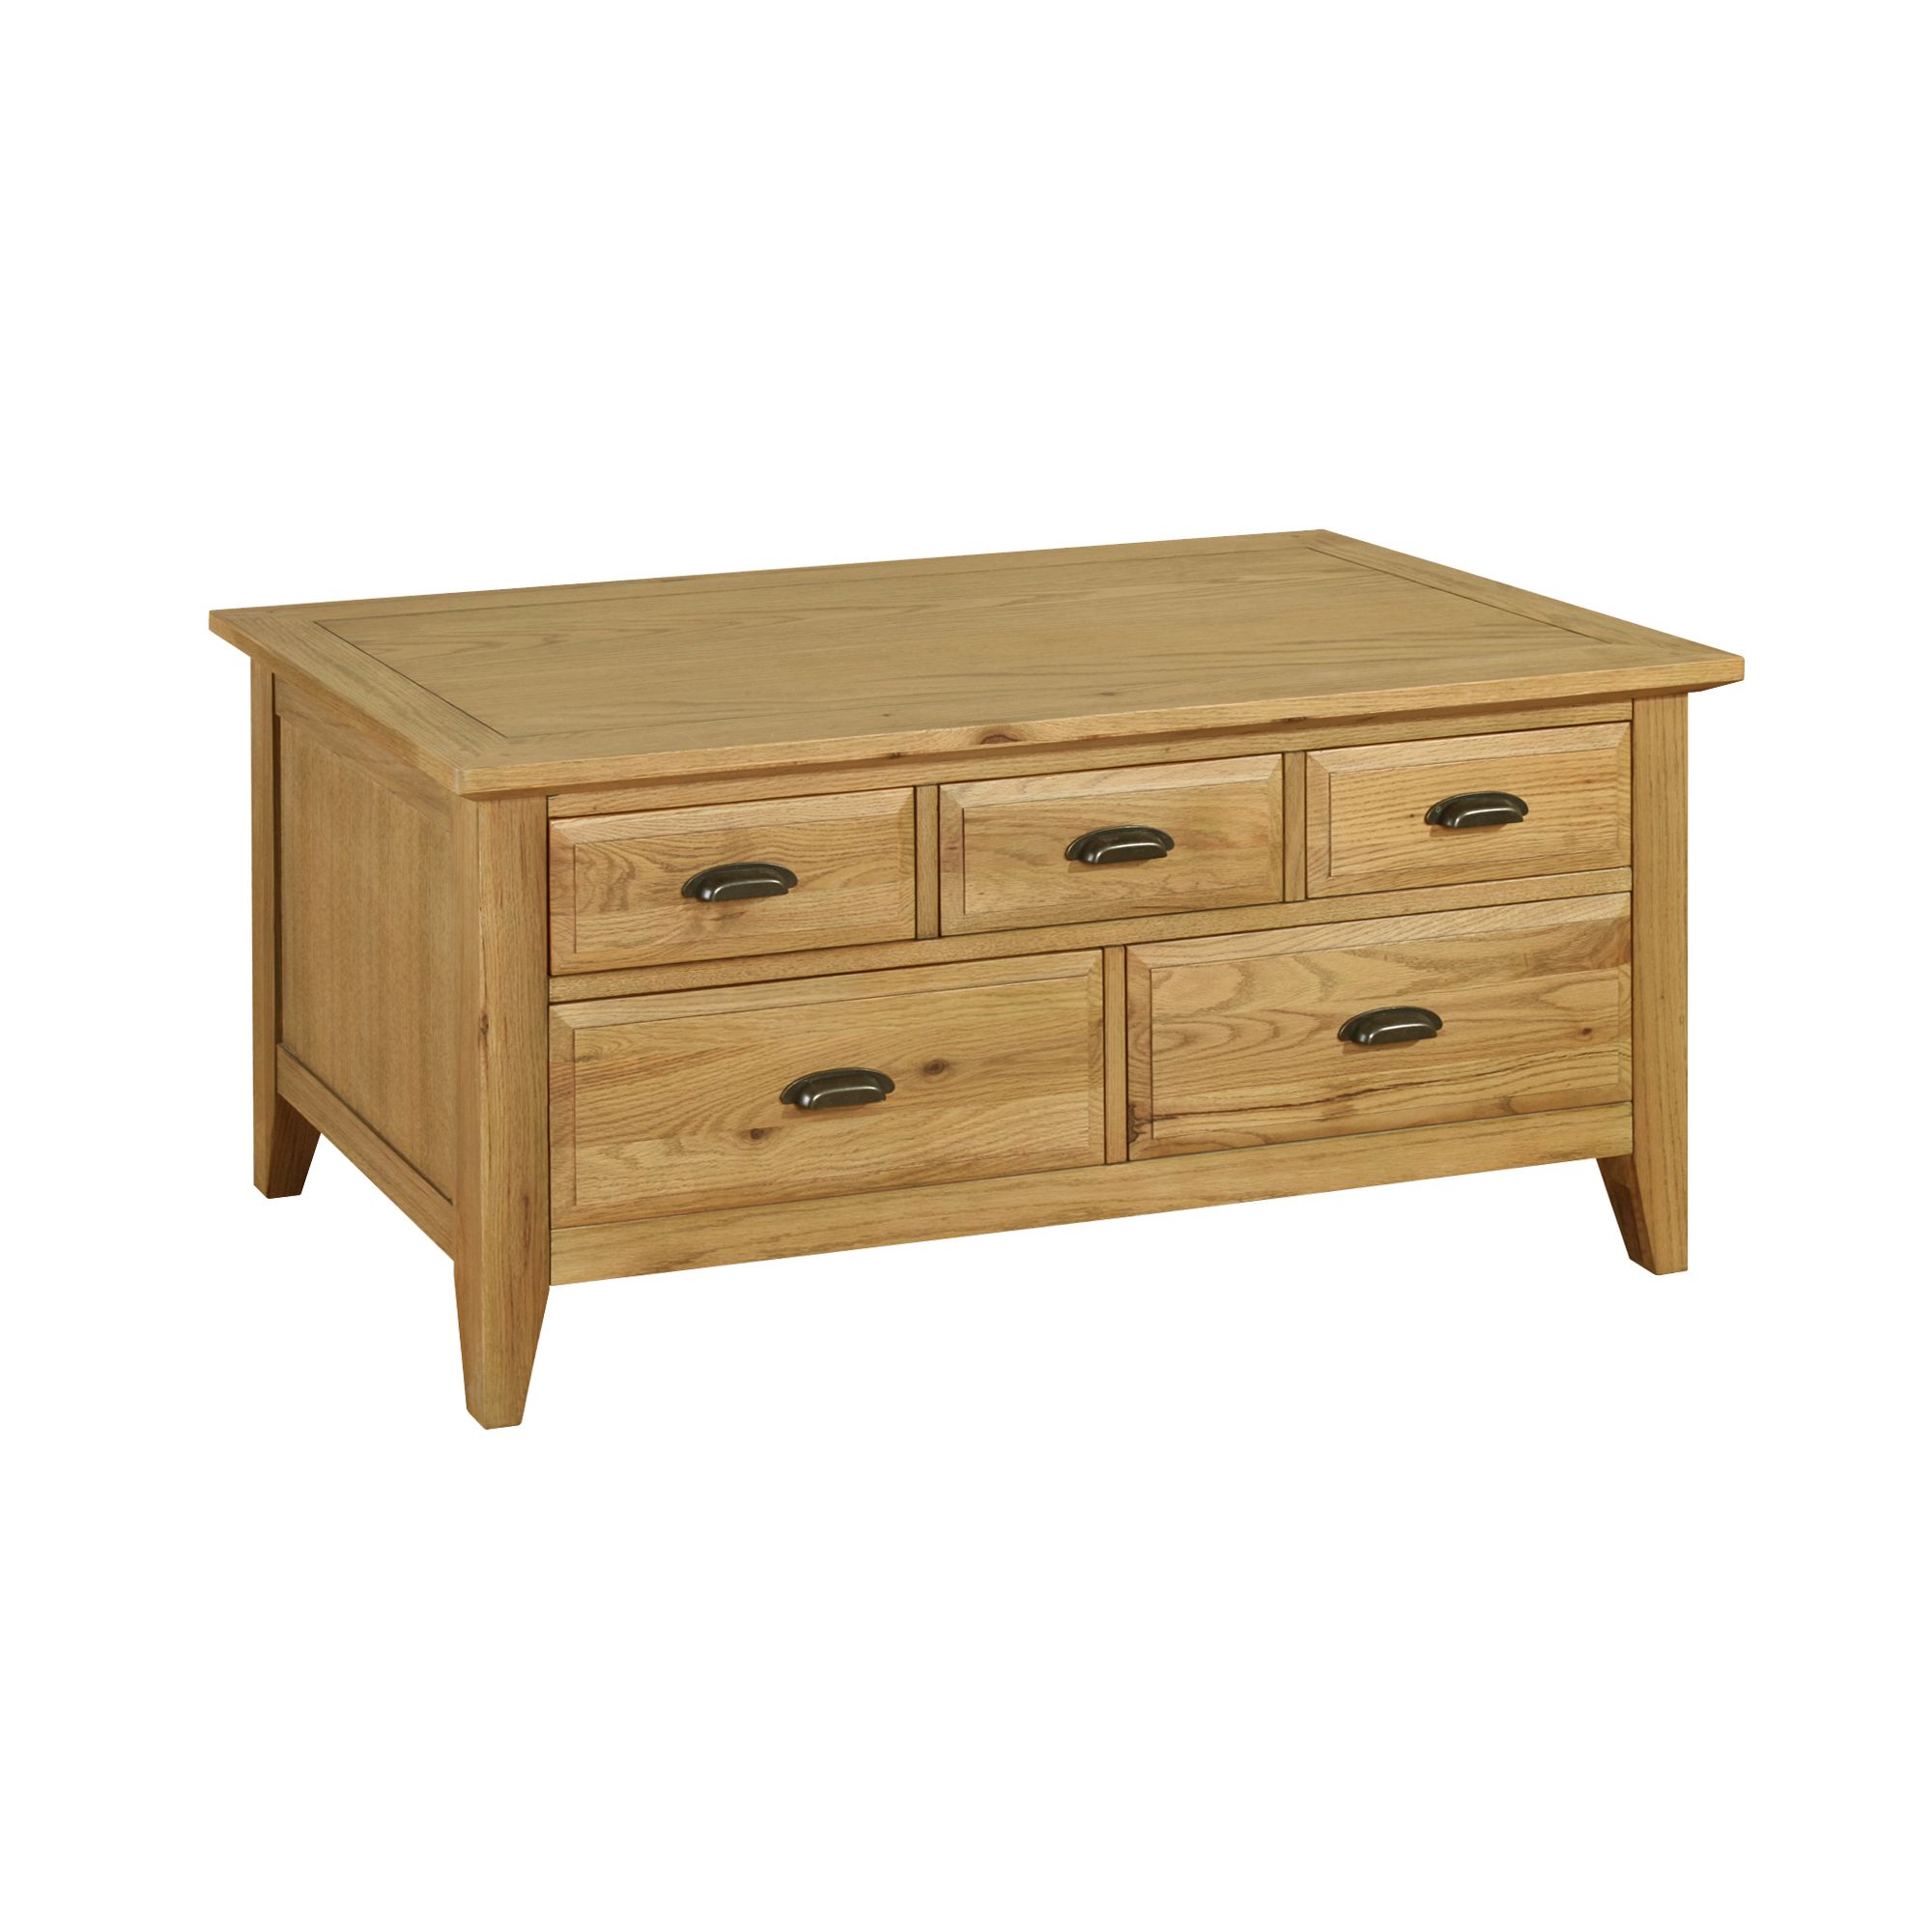 Alterton Furniture Mississippi Storage Coffee Table at Tesco Direct